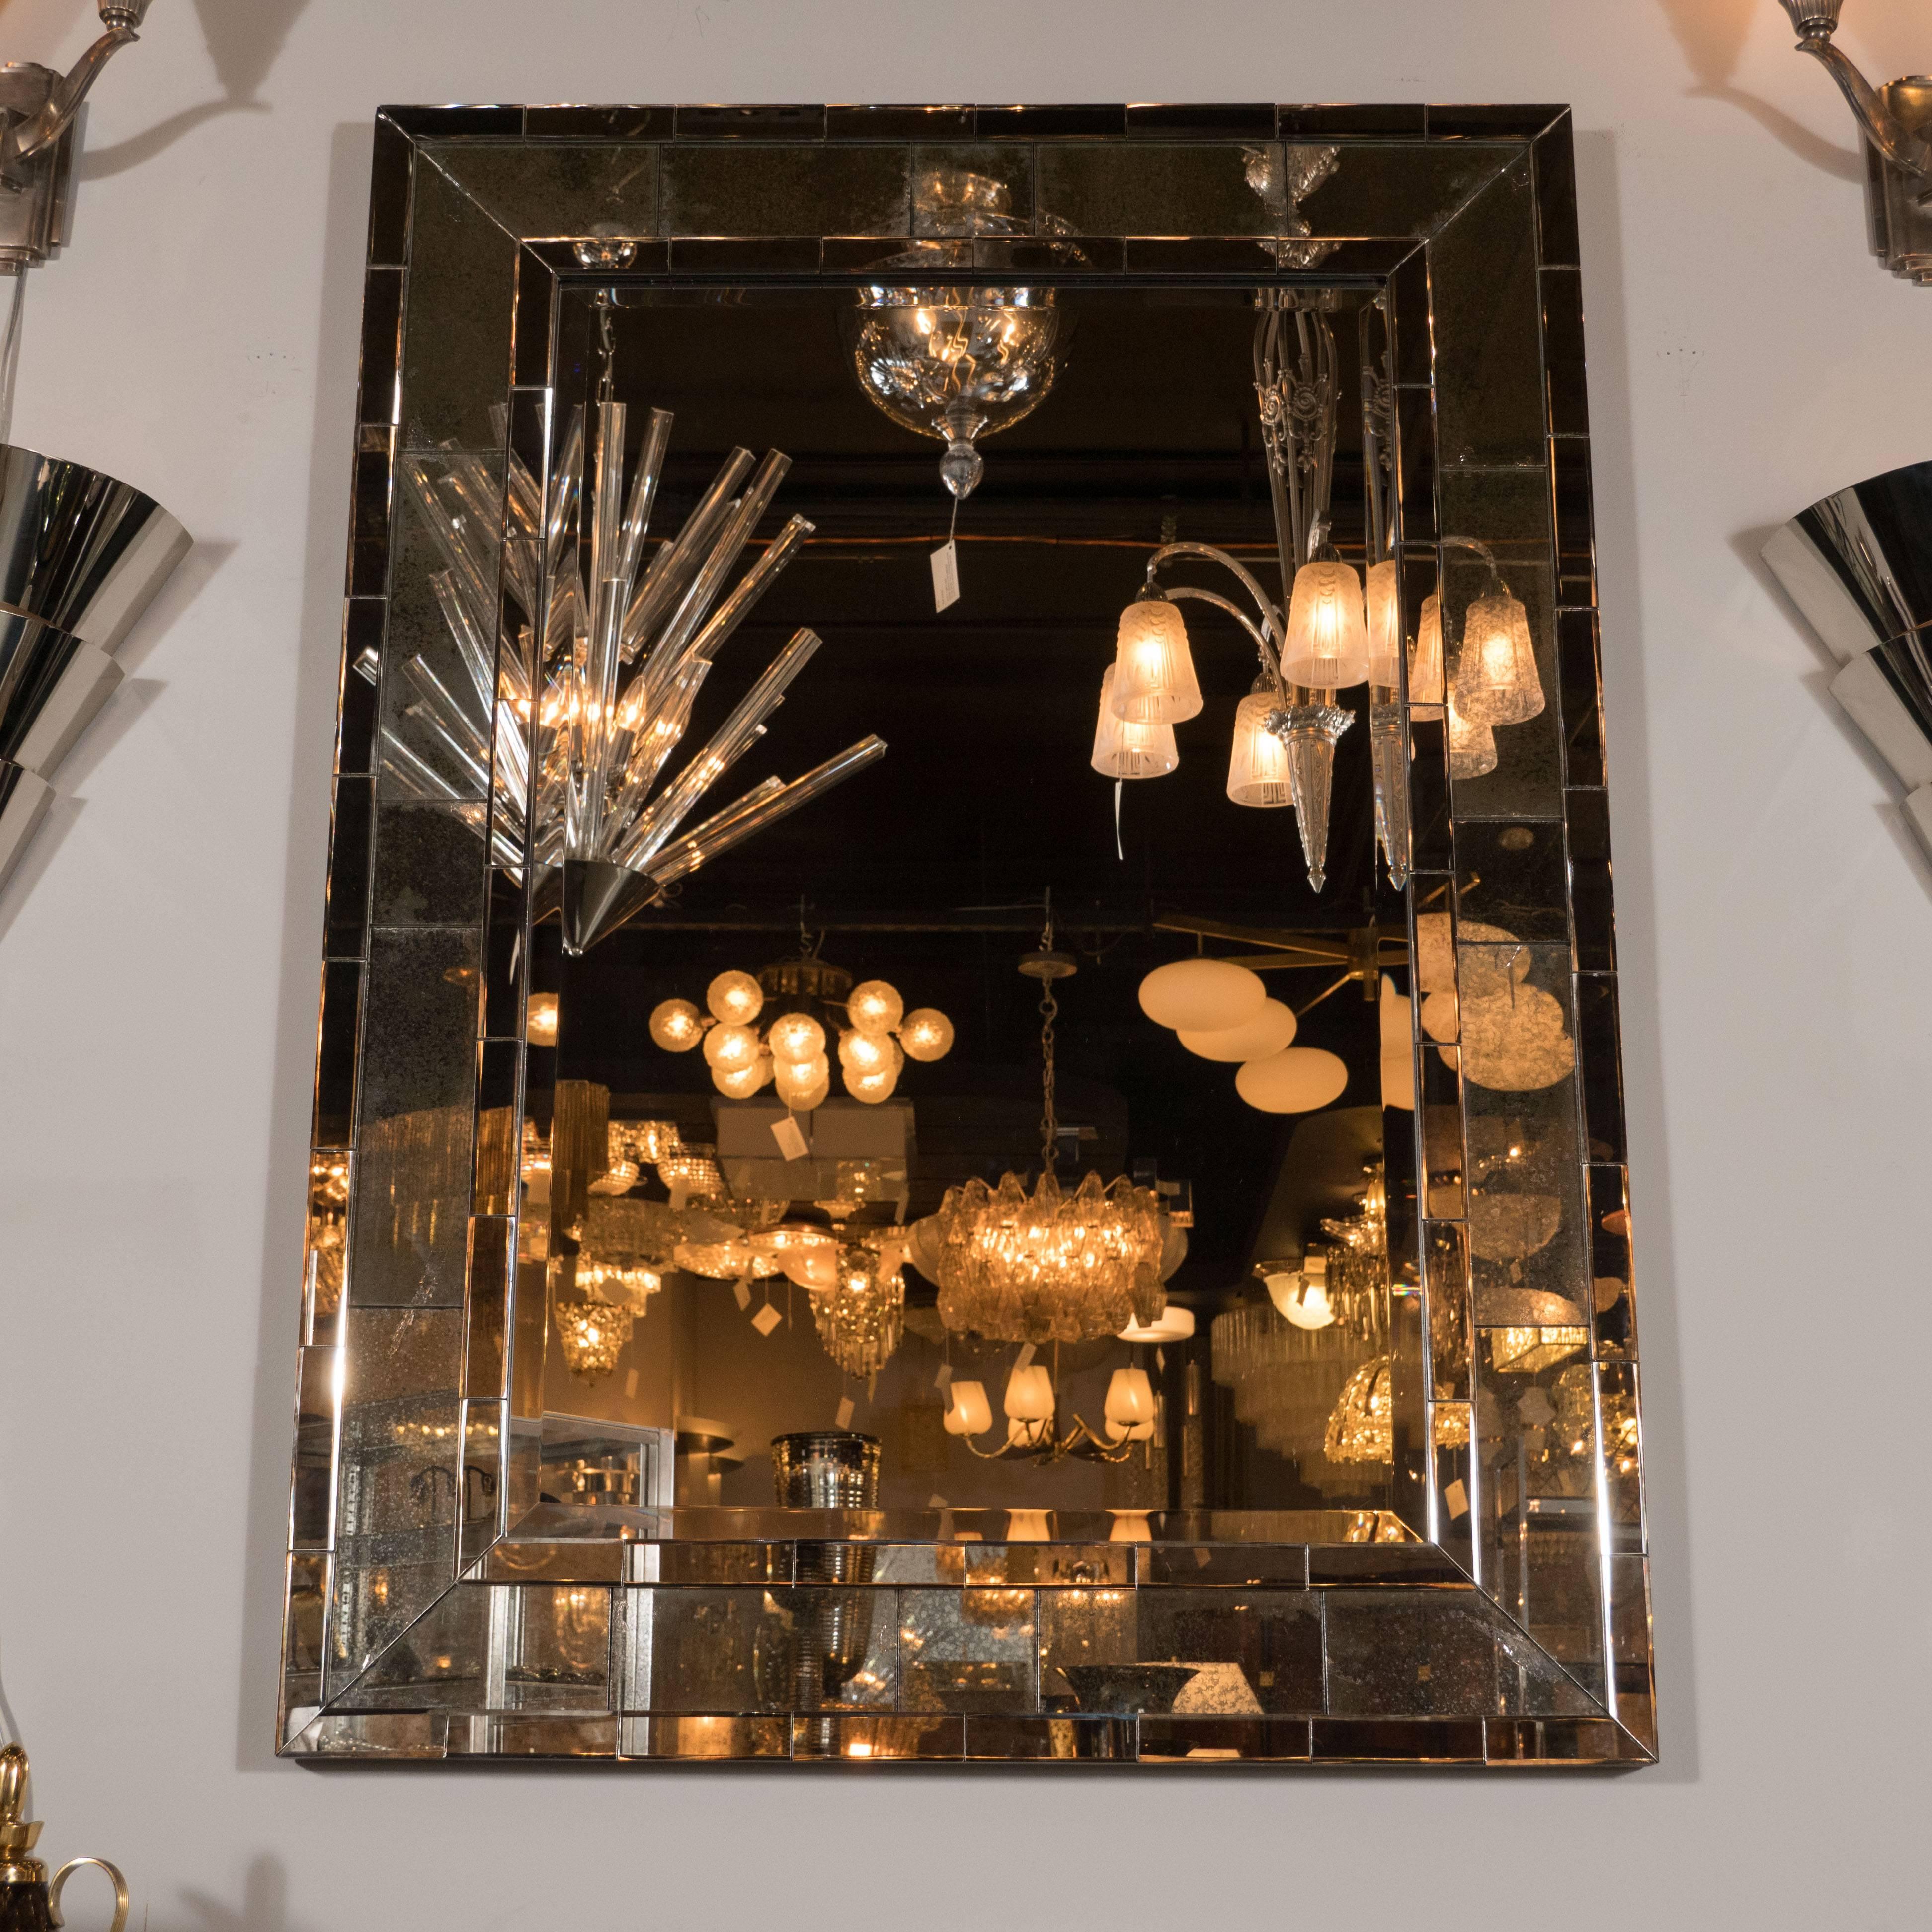 This elegant Mid-Century Modernist mirror features a mosaic antiqued mirror border with a beautiful patina. The contrast between the radiant center and the smoky organic texture of the antiqued mirror offers a truly stunning contrast, which adds